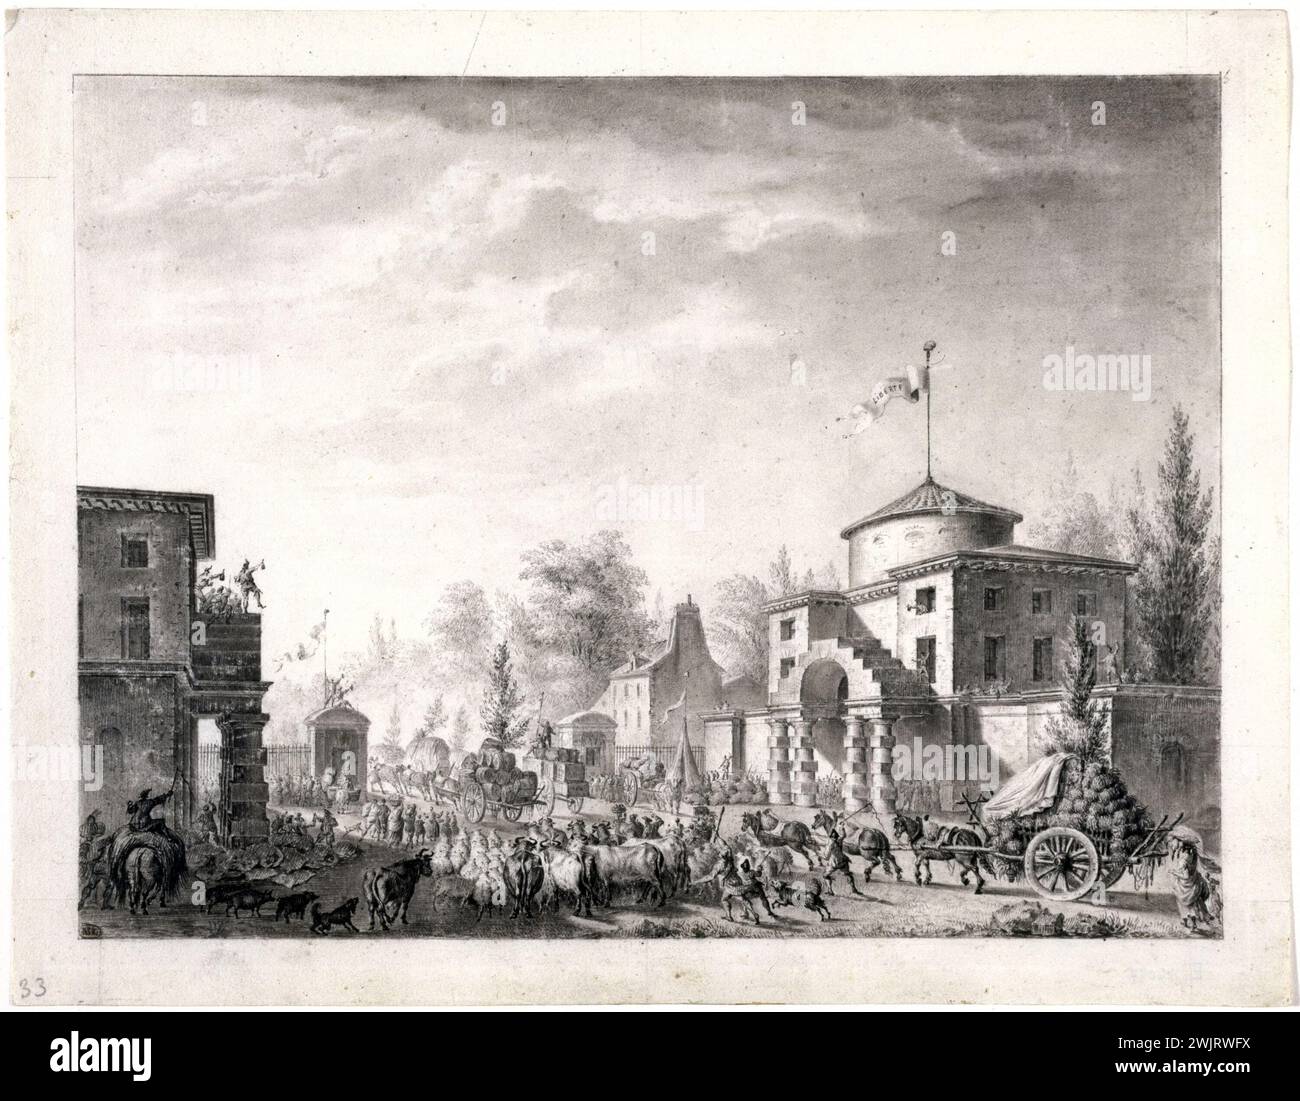 Jean-Louis Prieur le Jeune (1759-1795). 'Entrance of the free barriers, May 1, 1791'. Drawing. Paris, Carnavalet museum. 27118-17 Barriere, customs, tax, French revolution, deletion Stock Photo